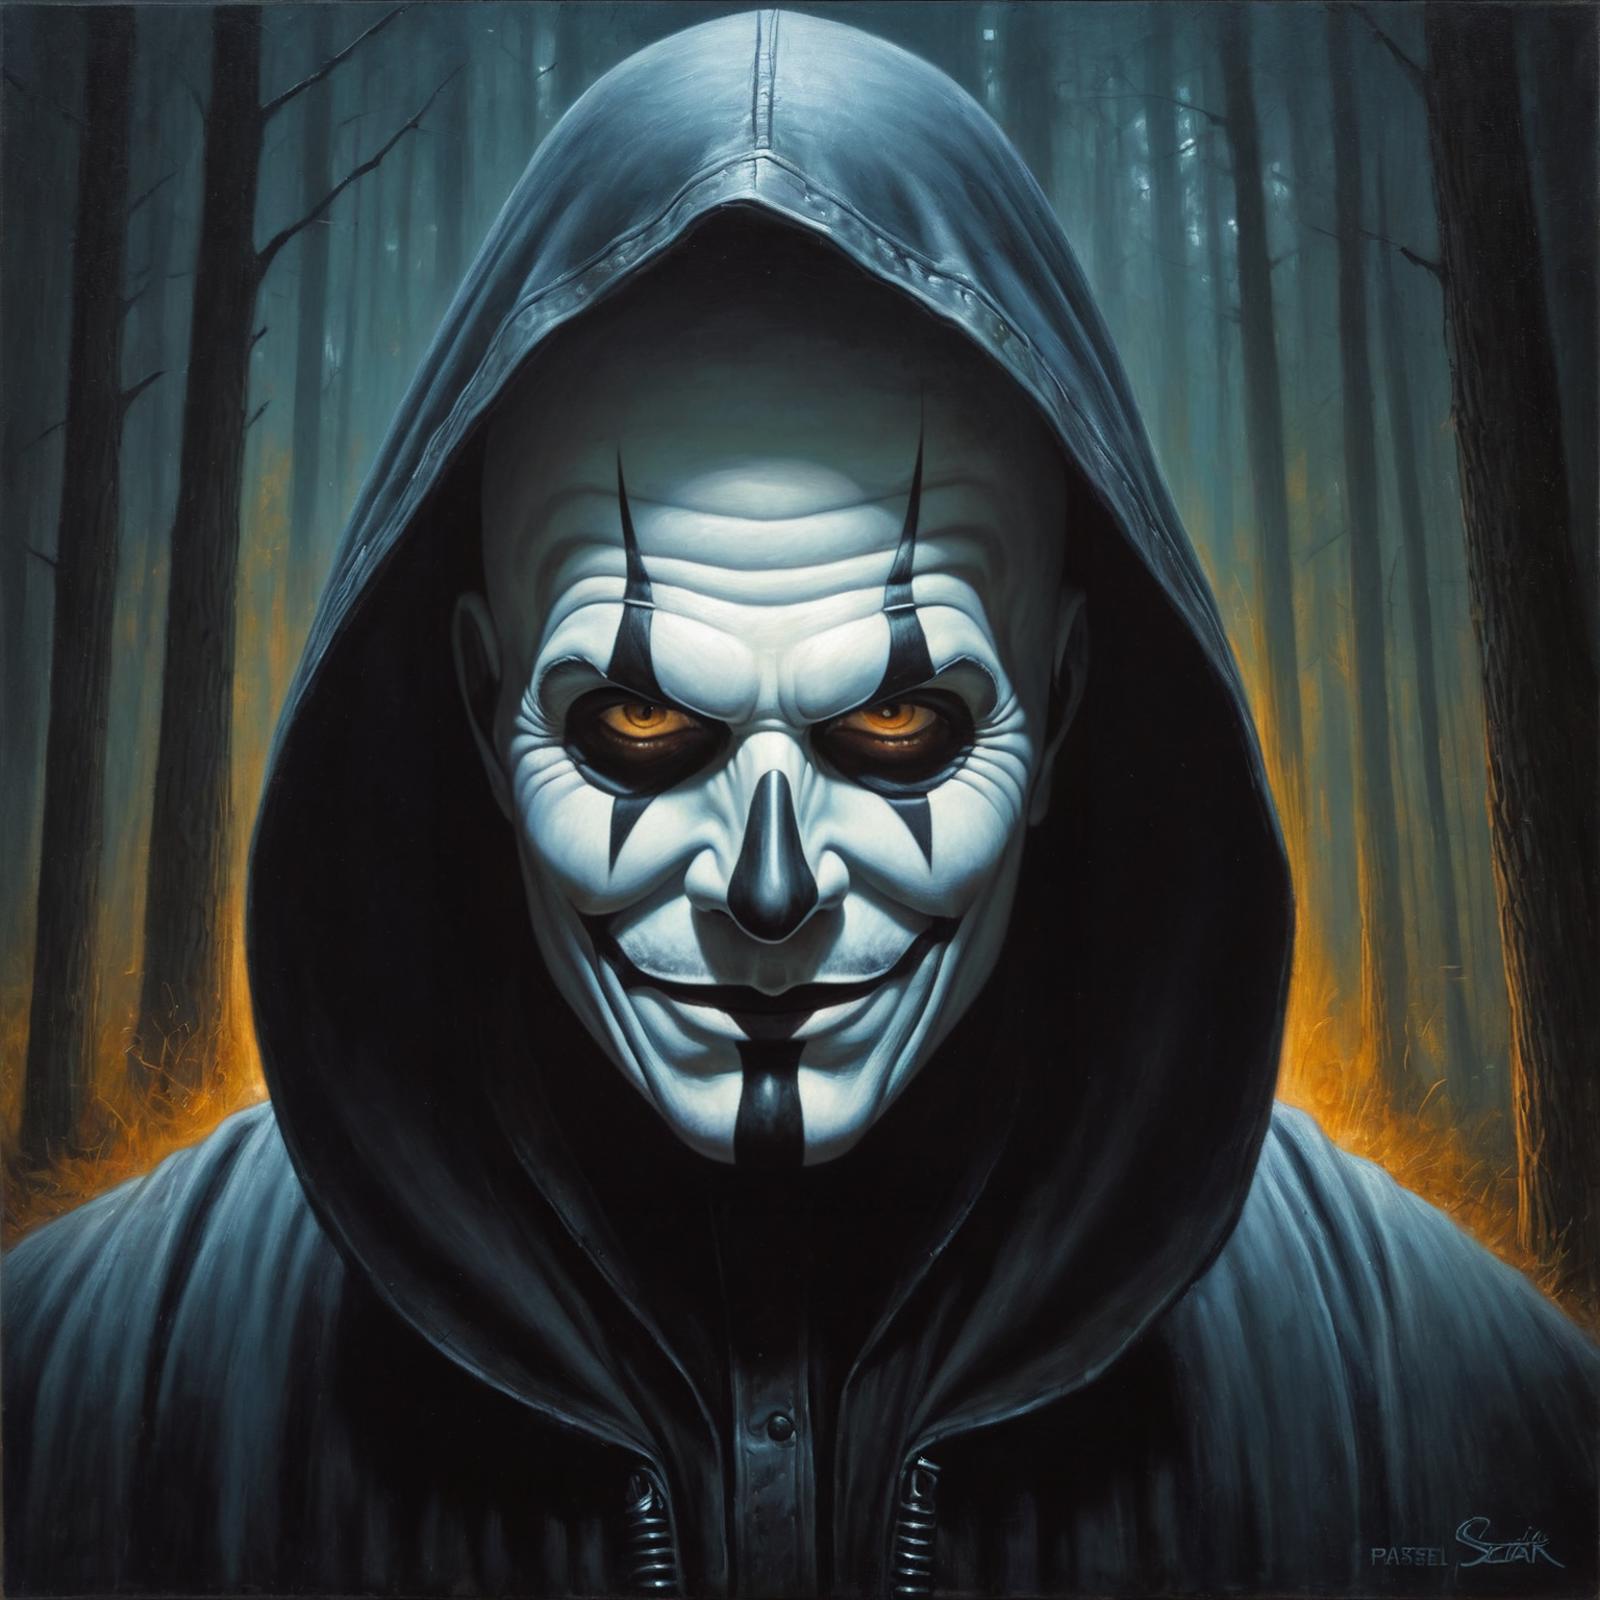 A painting of a creepy clown wearing a hooded cloak and makeup.